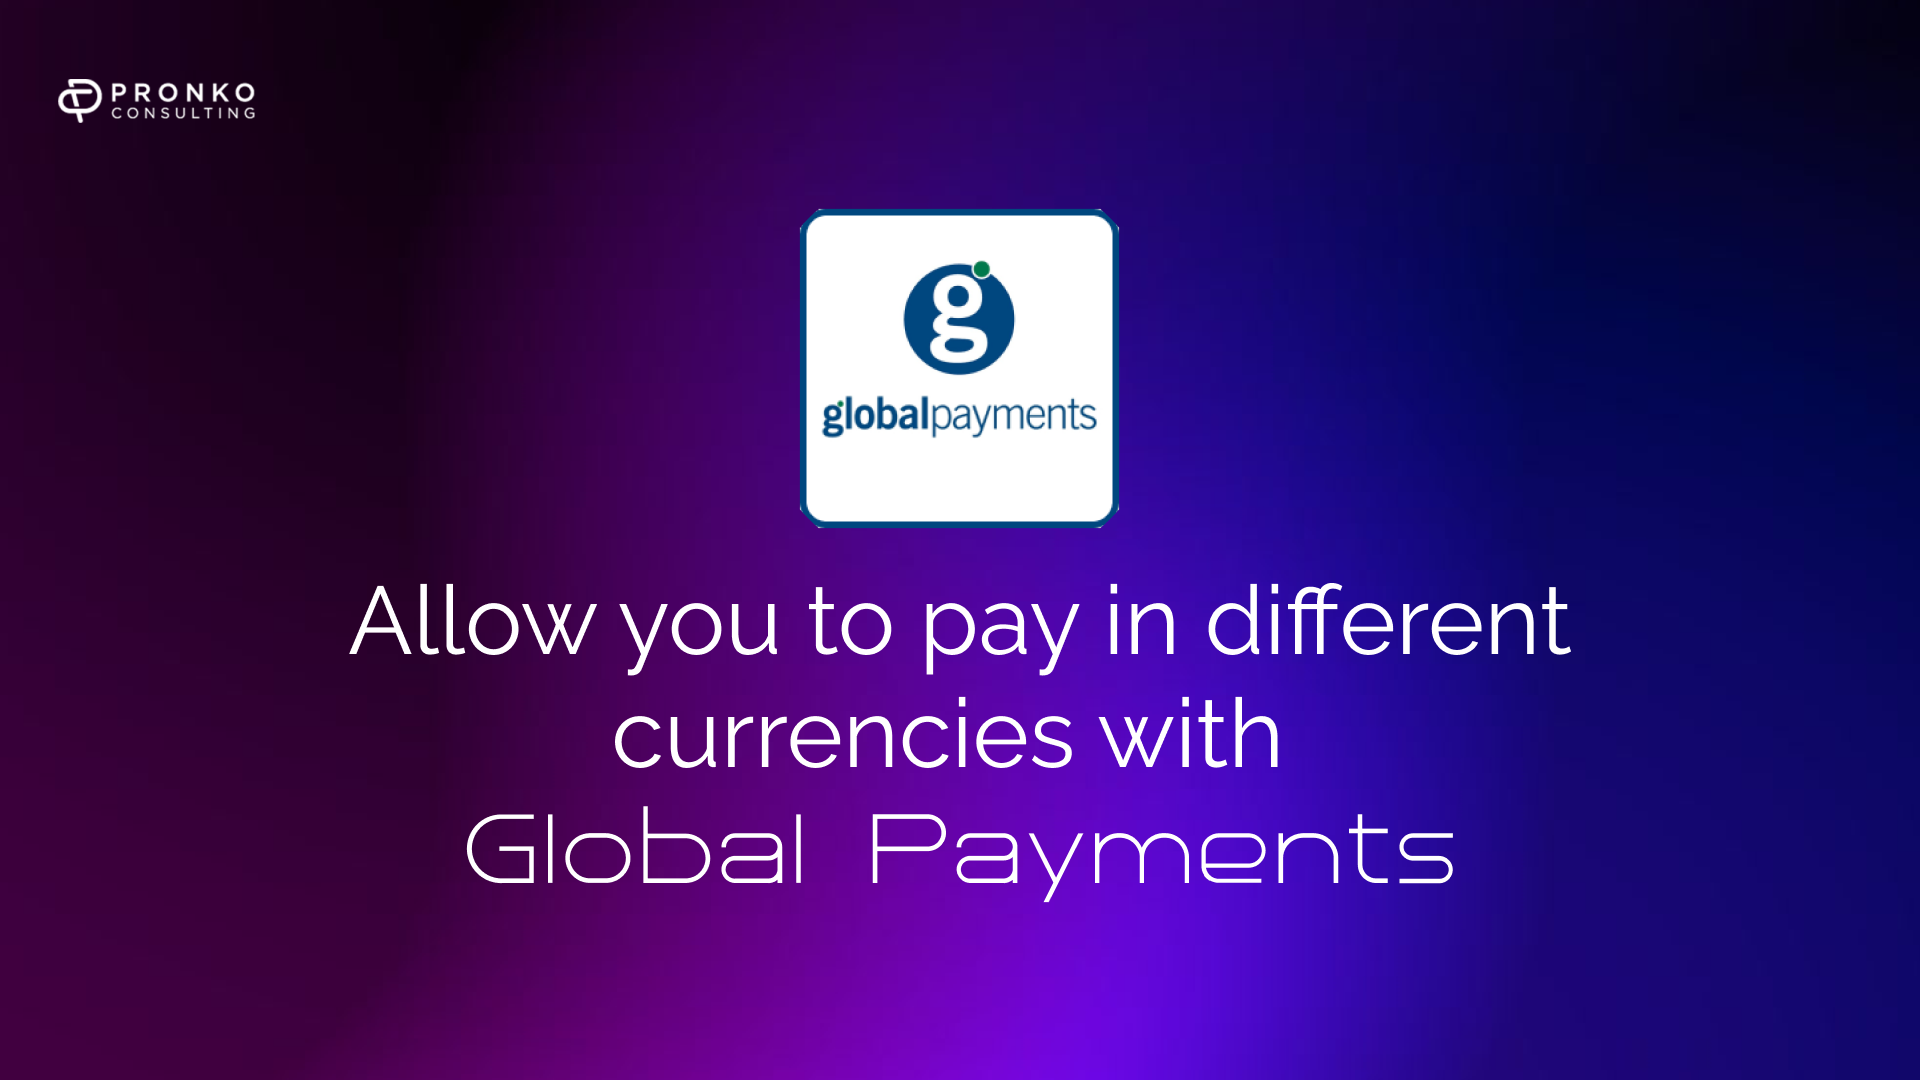 How to allow customers to pay in different currencies?